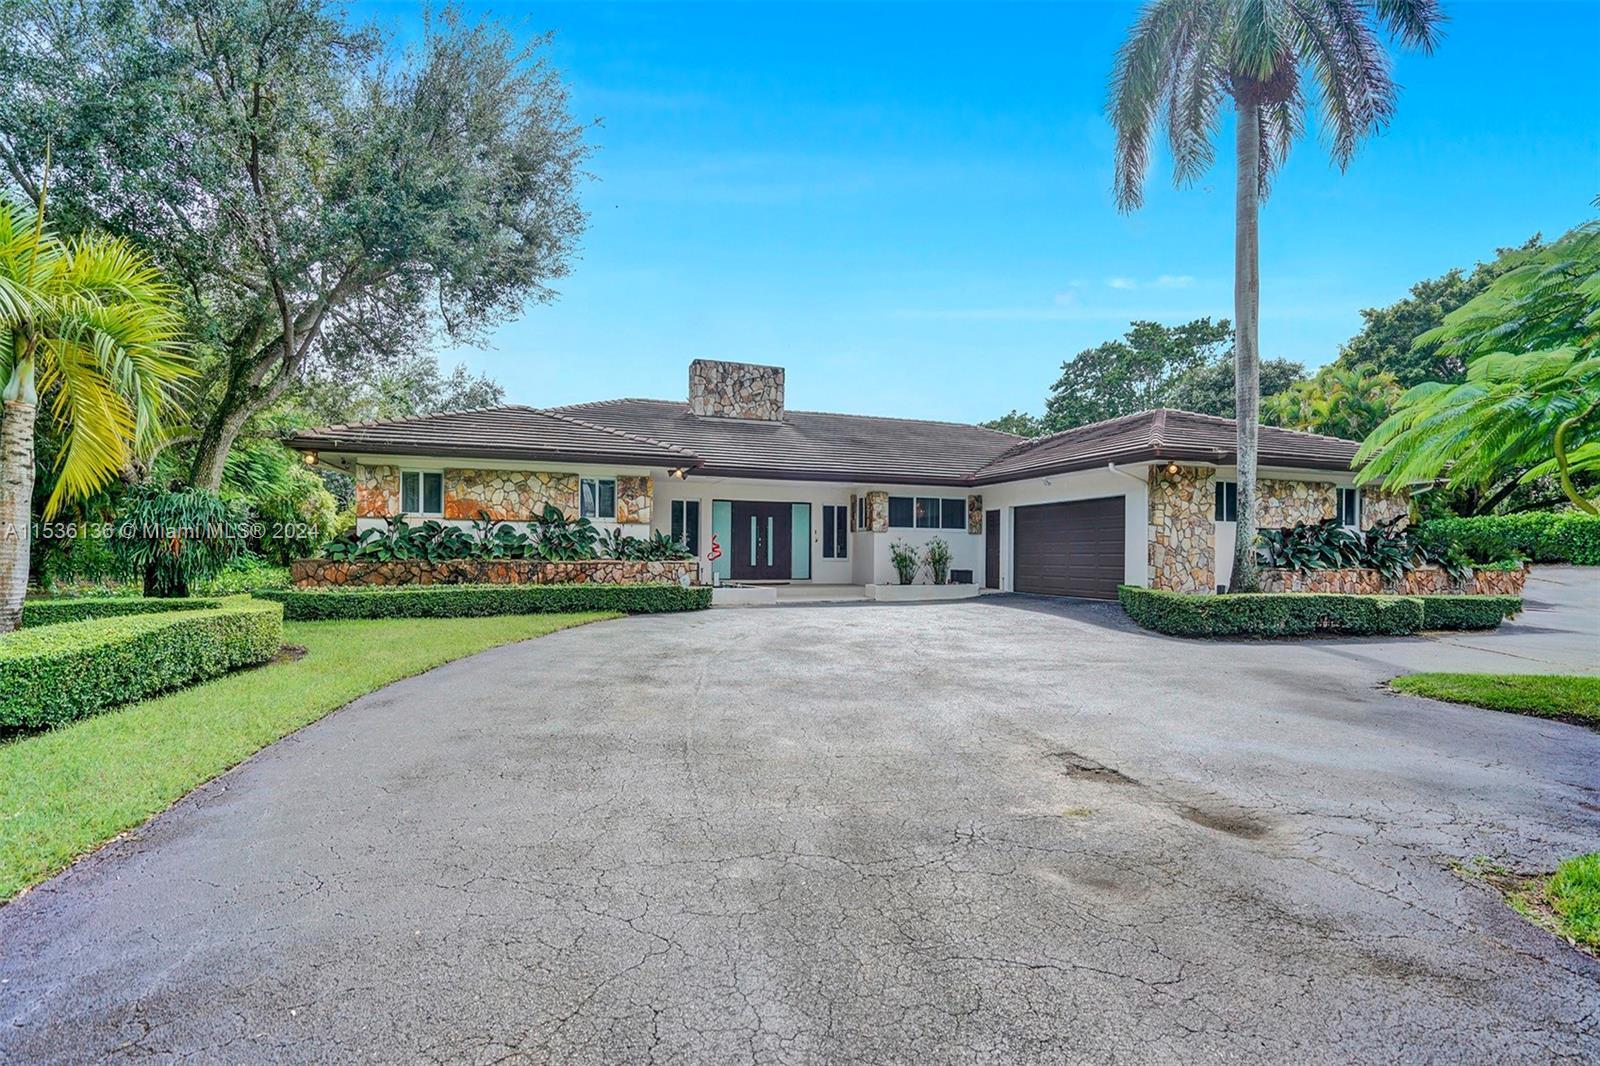 6650 Sw 112th St, Pinecrest, Miami-Dade County, Florida - 5 Bedrooms  
4 Bathrooms - 